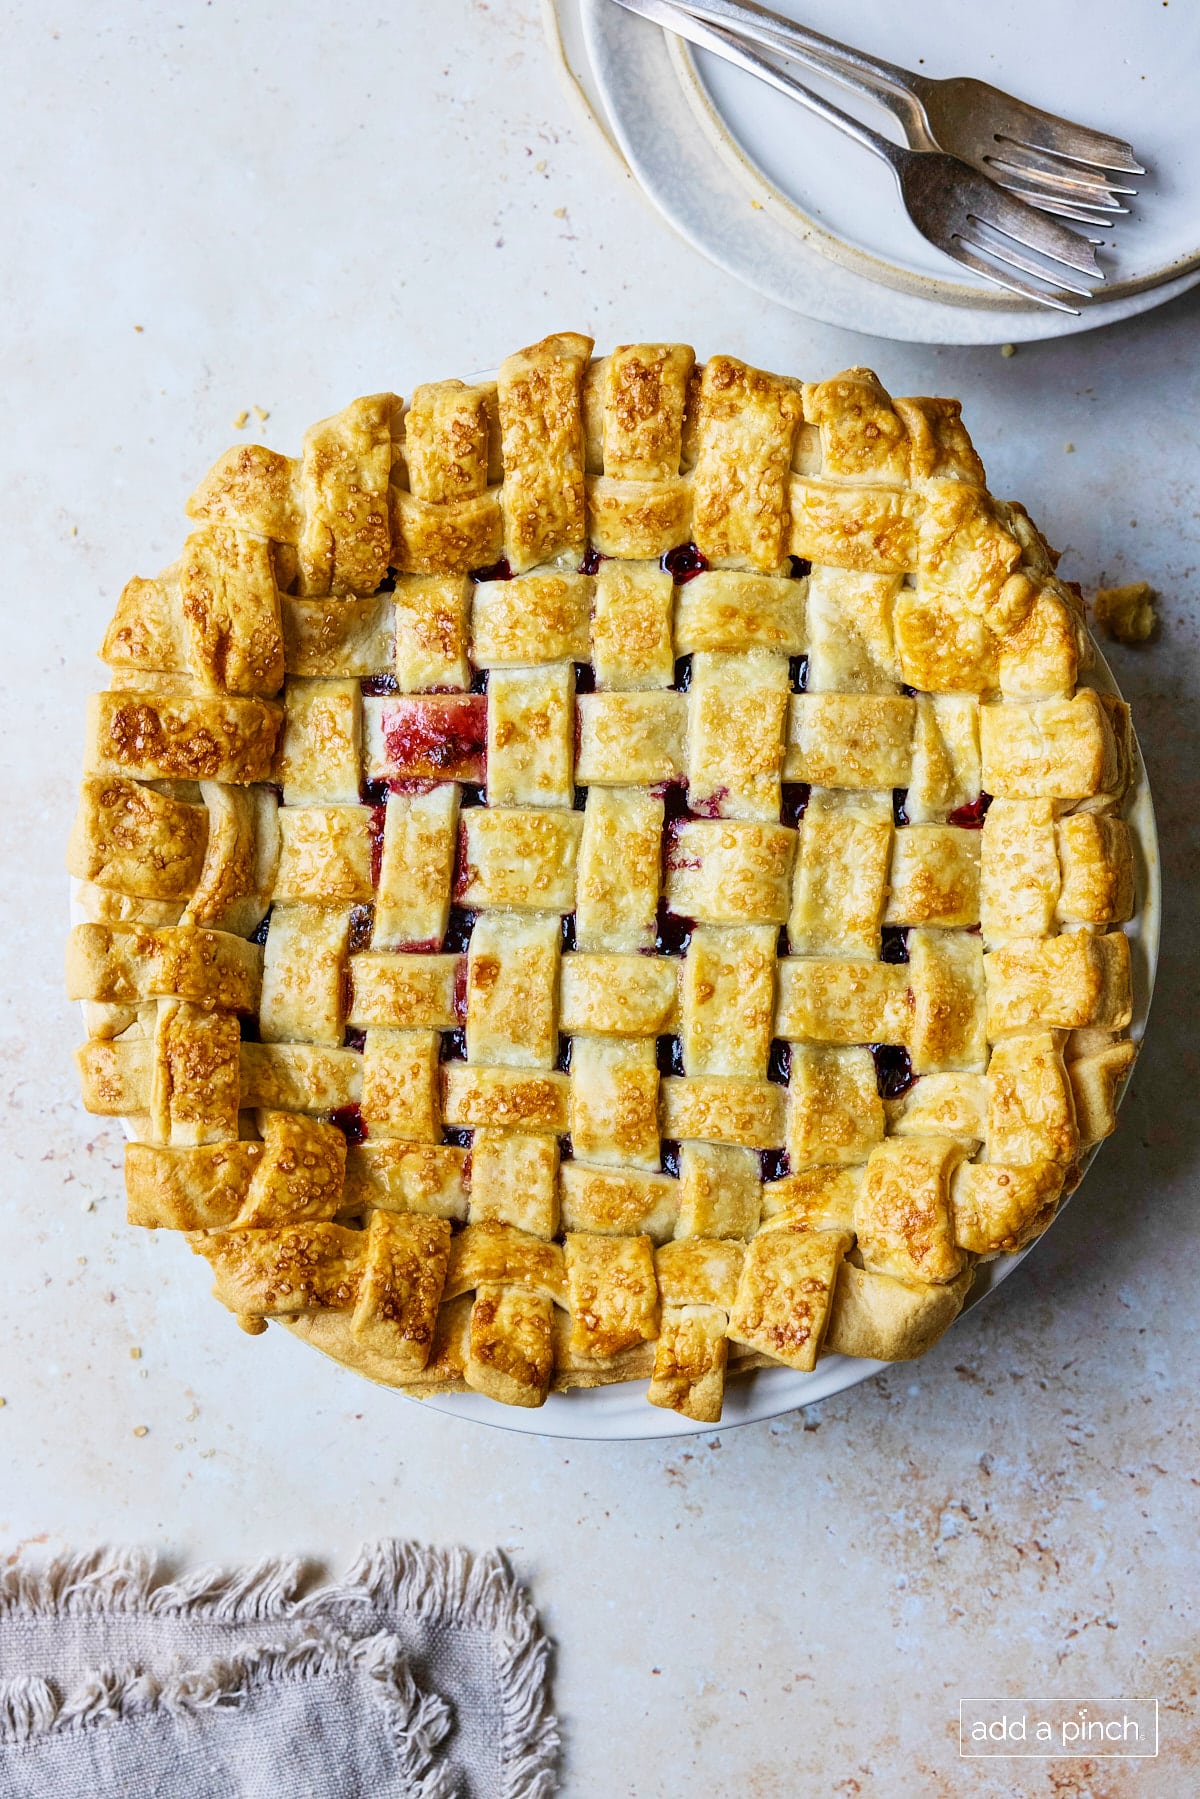 Baked cherry pie with lattice pie crust topping.